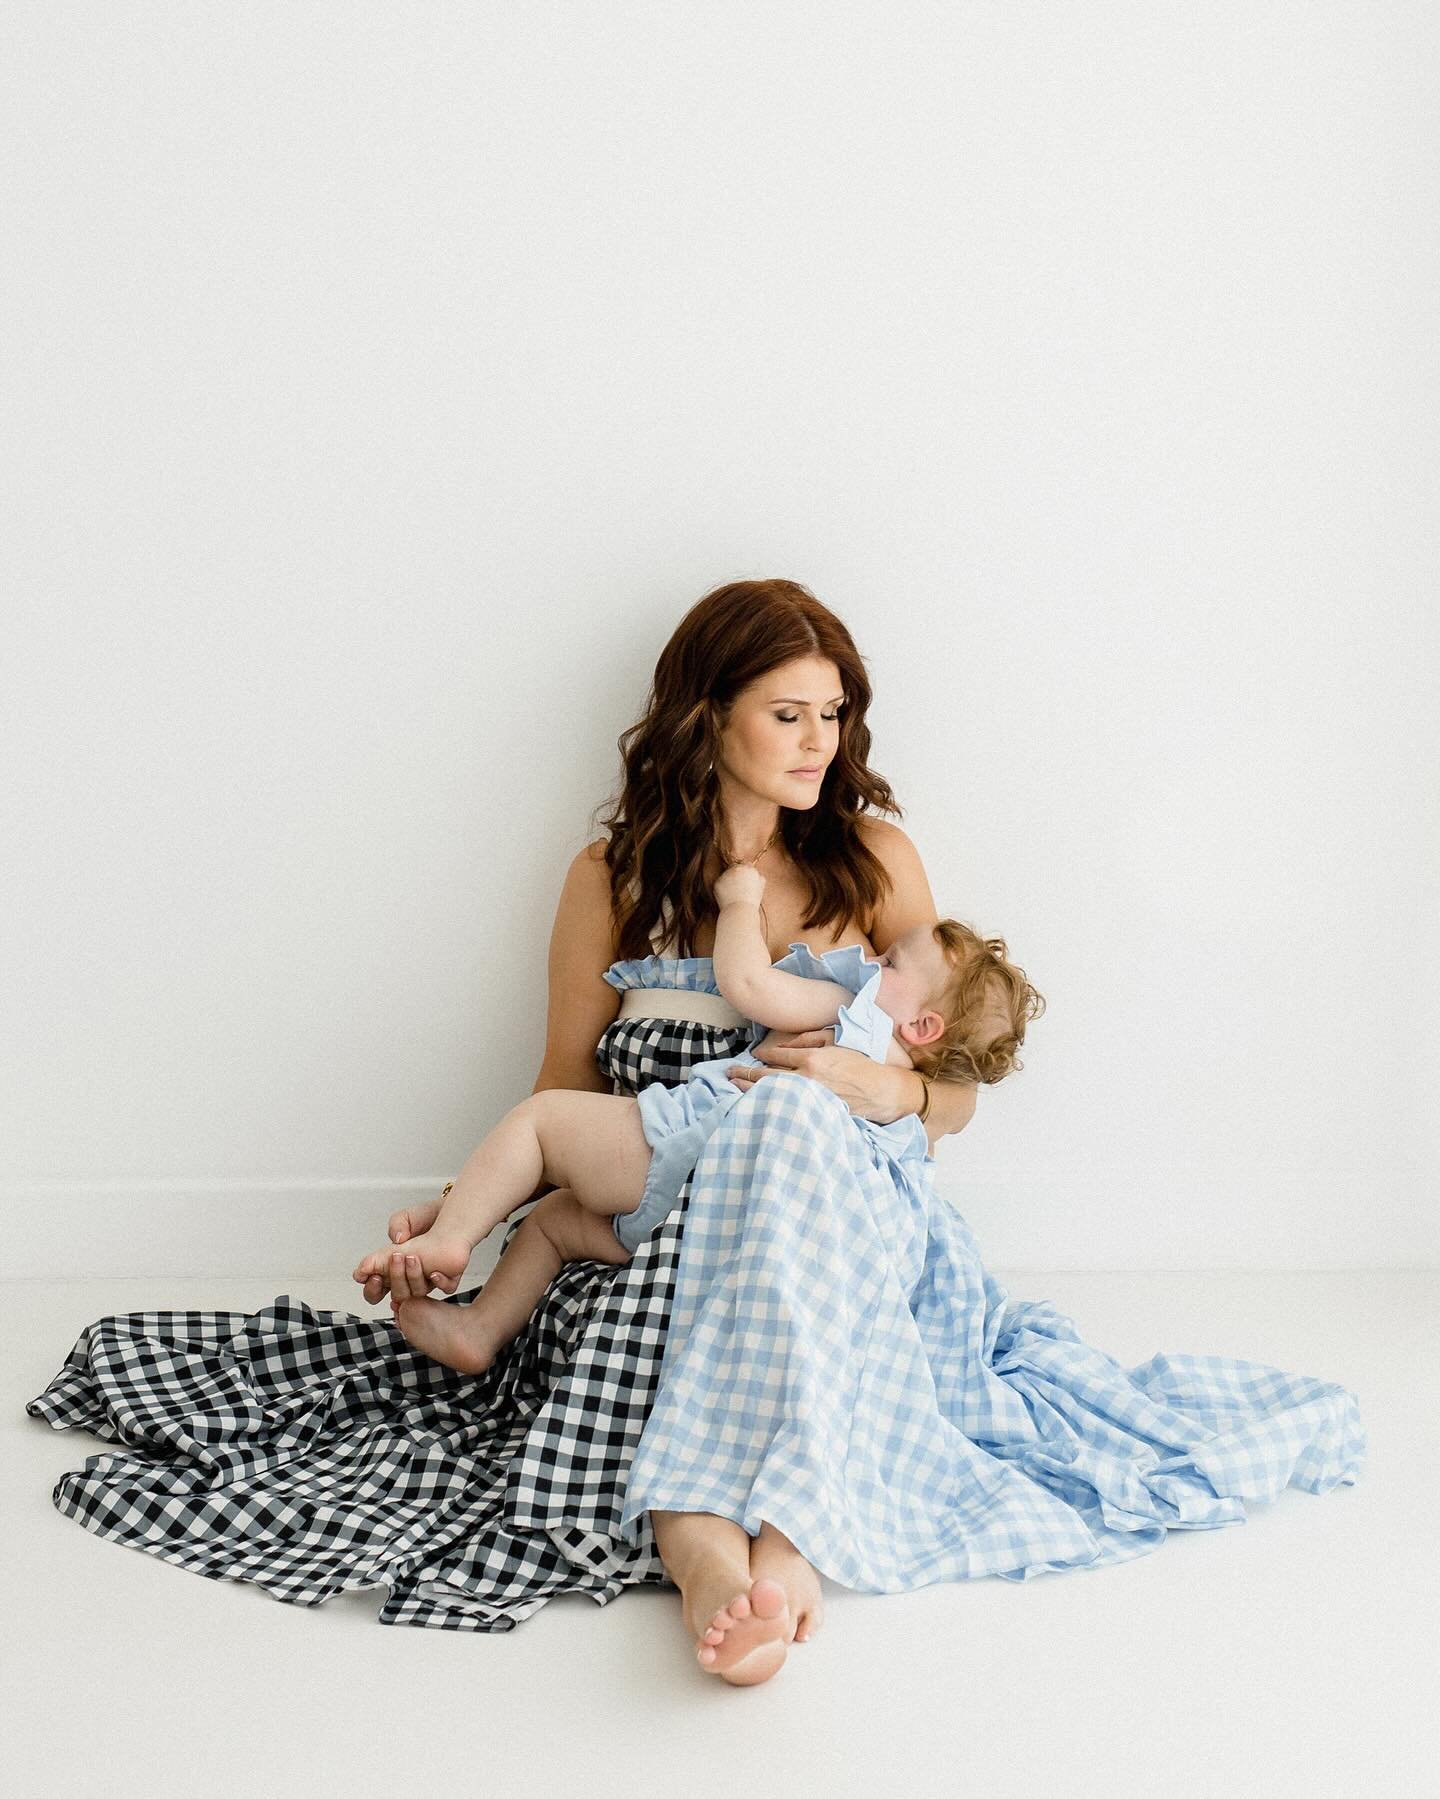 My wonderful client (and go to skin guru) @reneelapino reminded me today that it was a year since we shot this beautiful, intimate 1 year milestone session with her daughter Ophelia.

I always, ALWAYS ask my clients if they would like feeding photos 